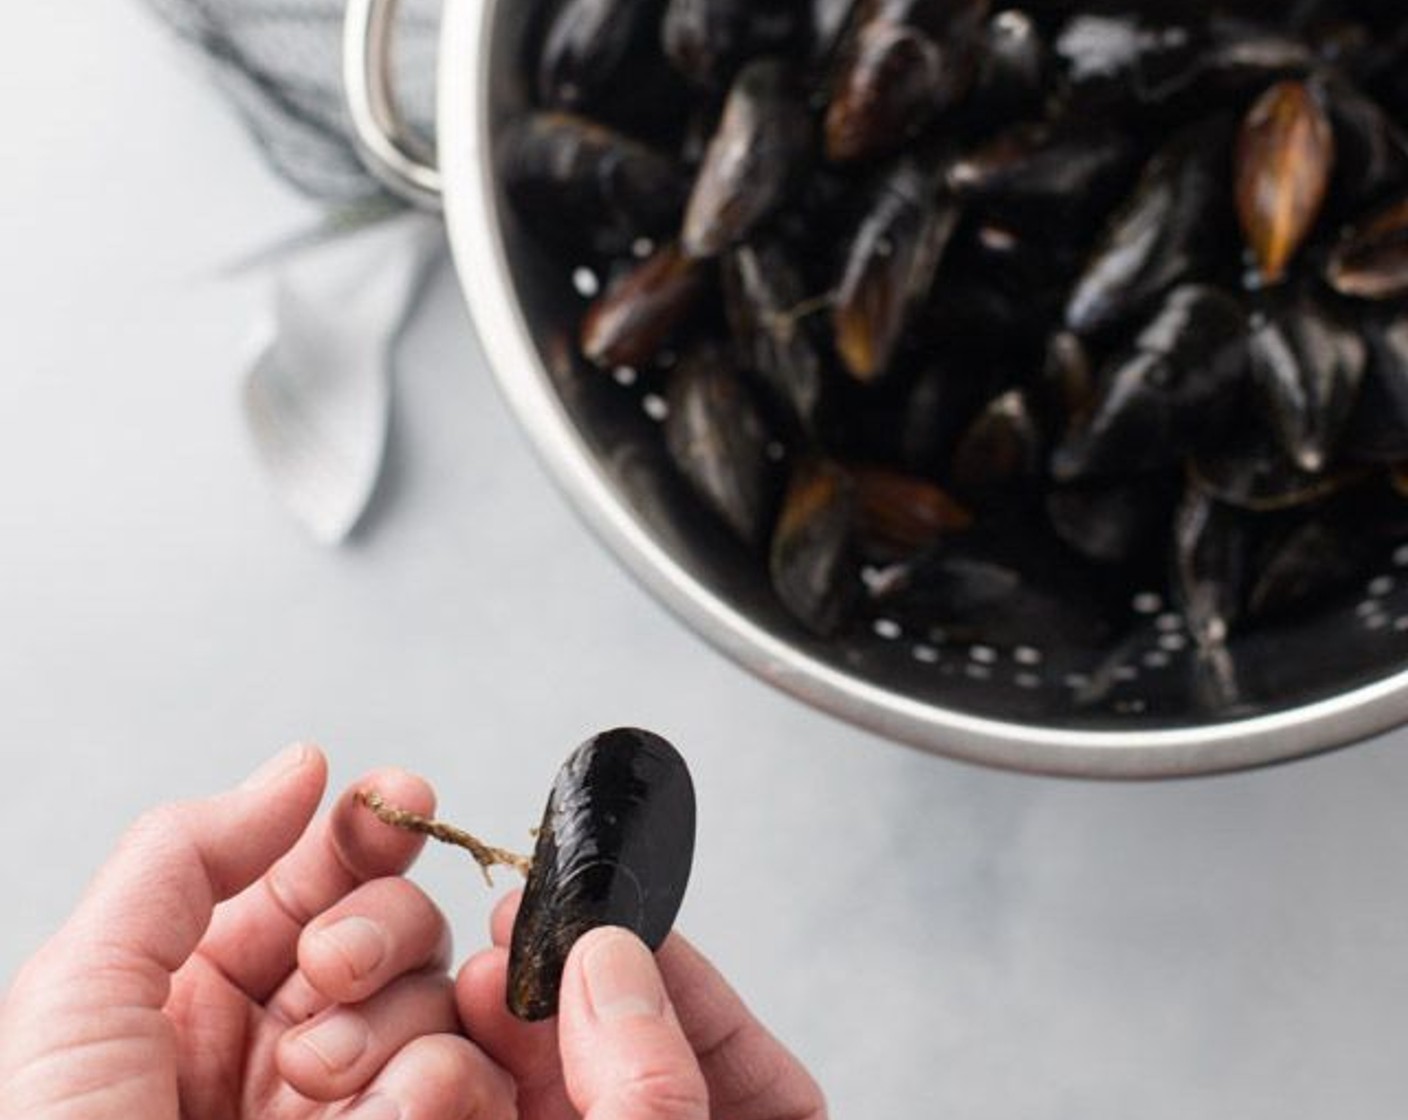 step 1 Clean and prepare Fresh Mussels (2 lb) by washing in a colander. If any mussels are slightly opened and do not close after tapped on, these mussels are dead and should be discarded. Remove any mussel "beards" (thread-like hairs protruding from the shell).